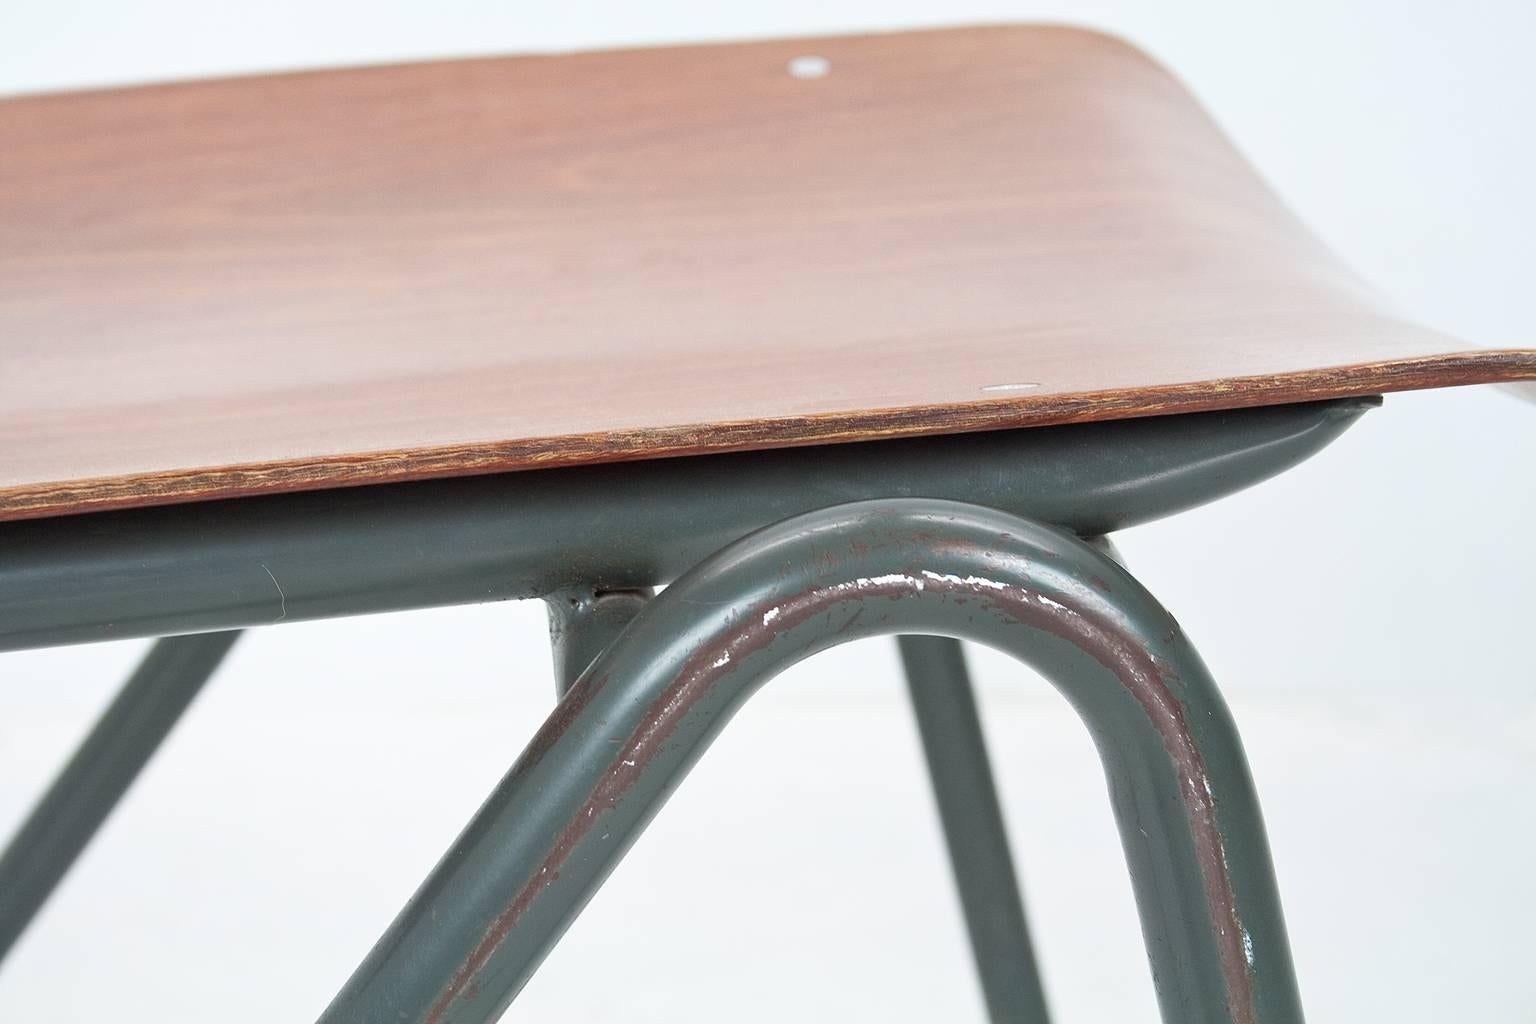 Dutch Industrial School Chairs 1970, Laminated Wood and Grey Metal Frame 1